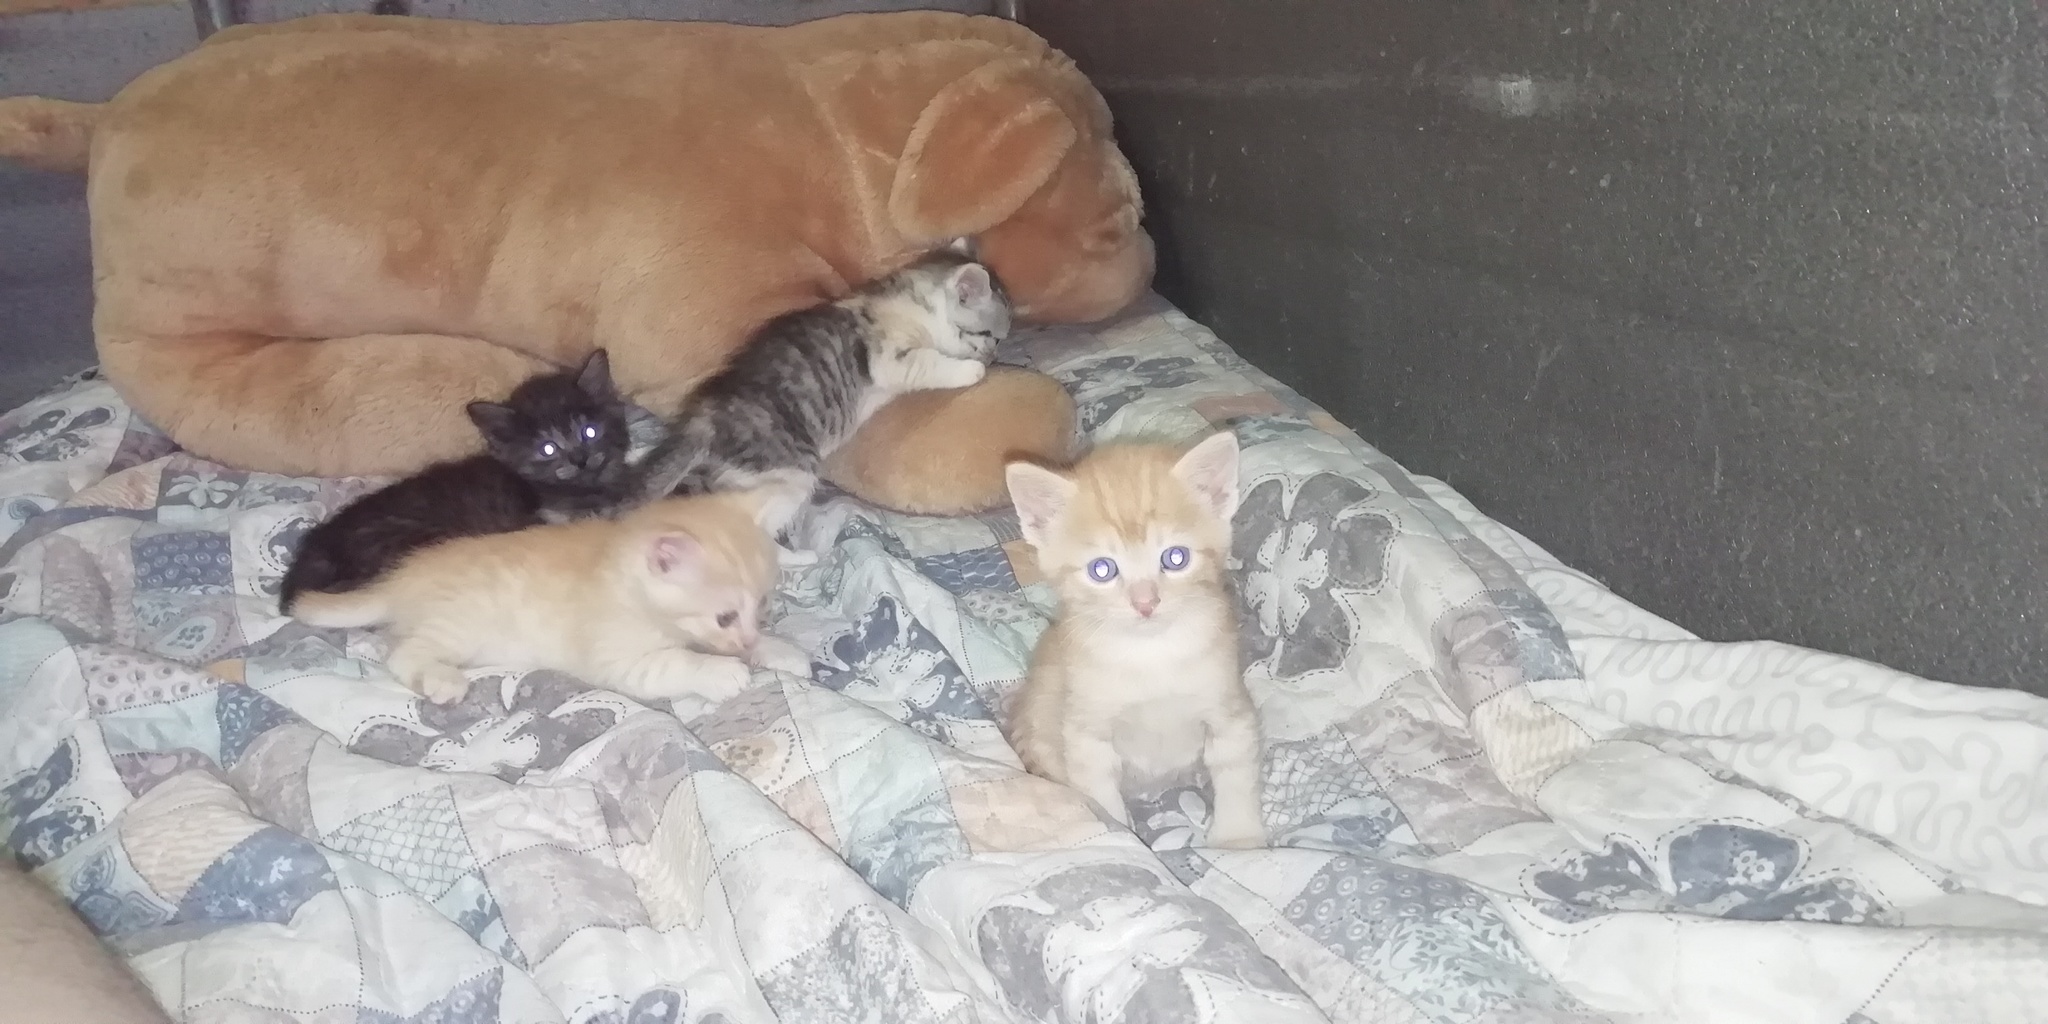 Help me find a home for the kittens - My, Kittens, Mobile photography, Longpost, Video, cat, Help, In good hands